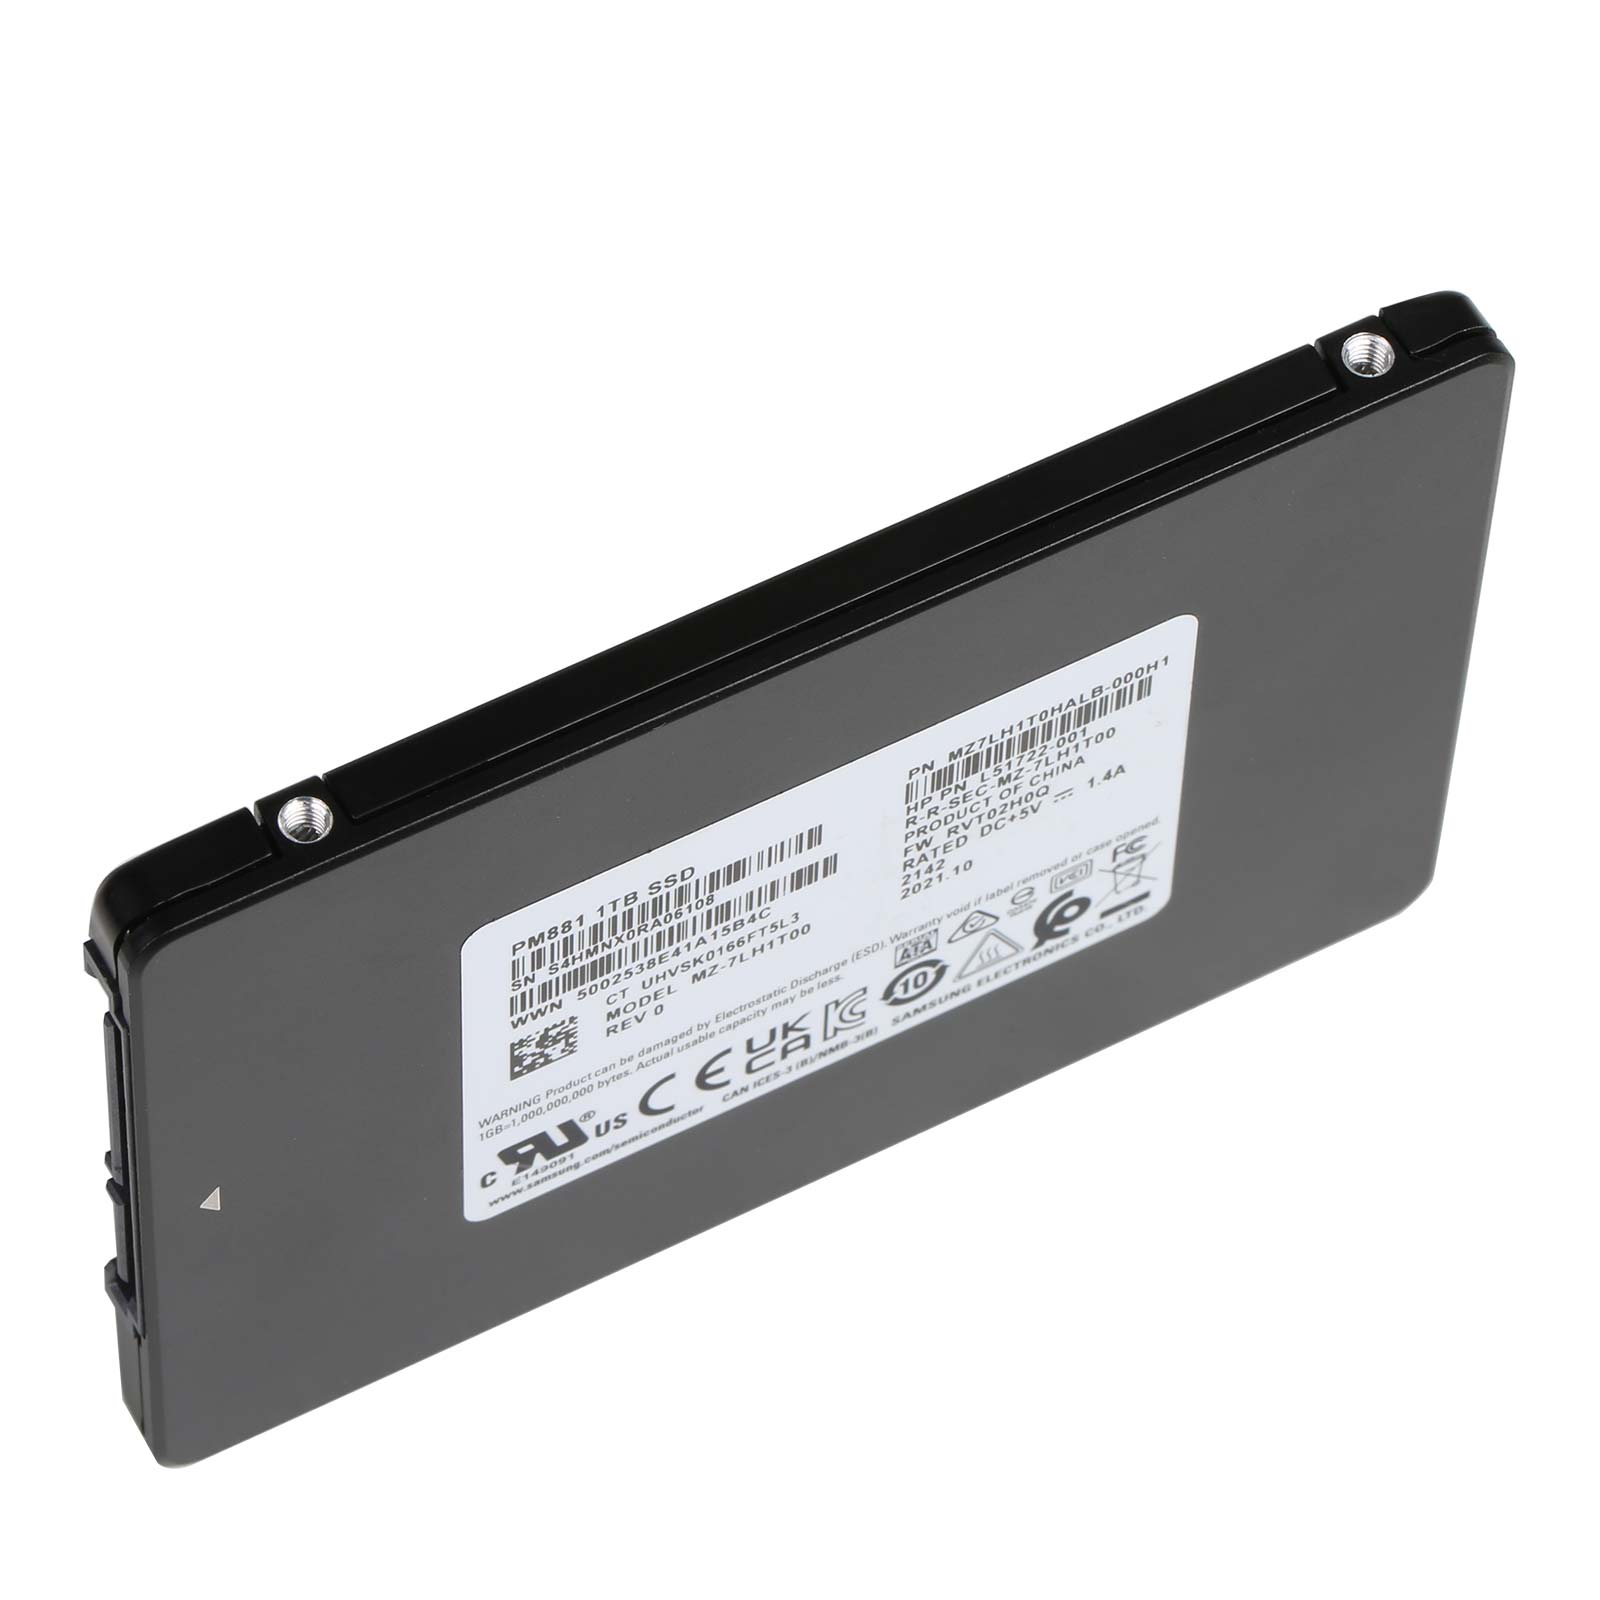 Samsung 1T SSD without software with faster write and read speed